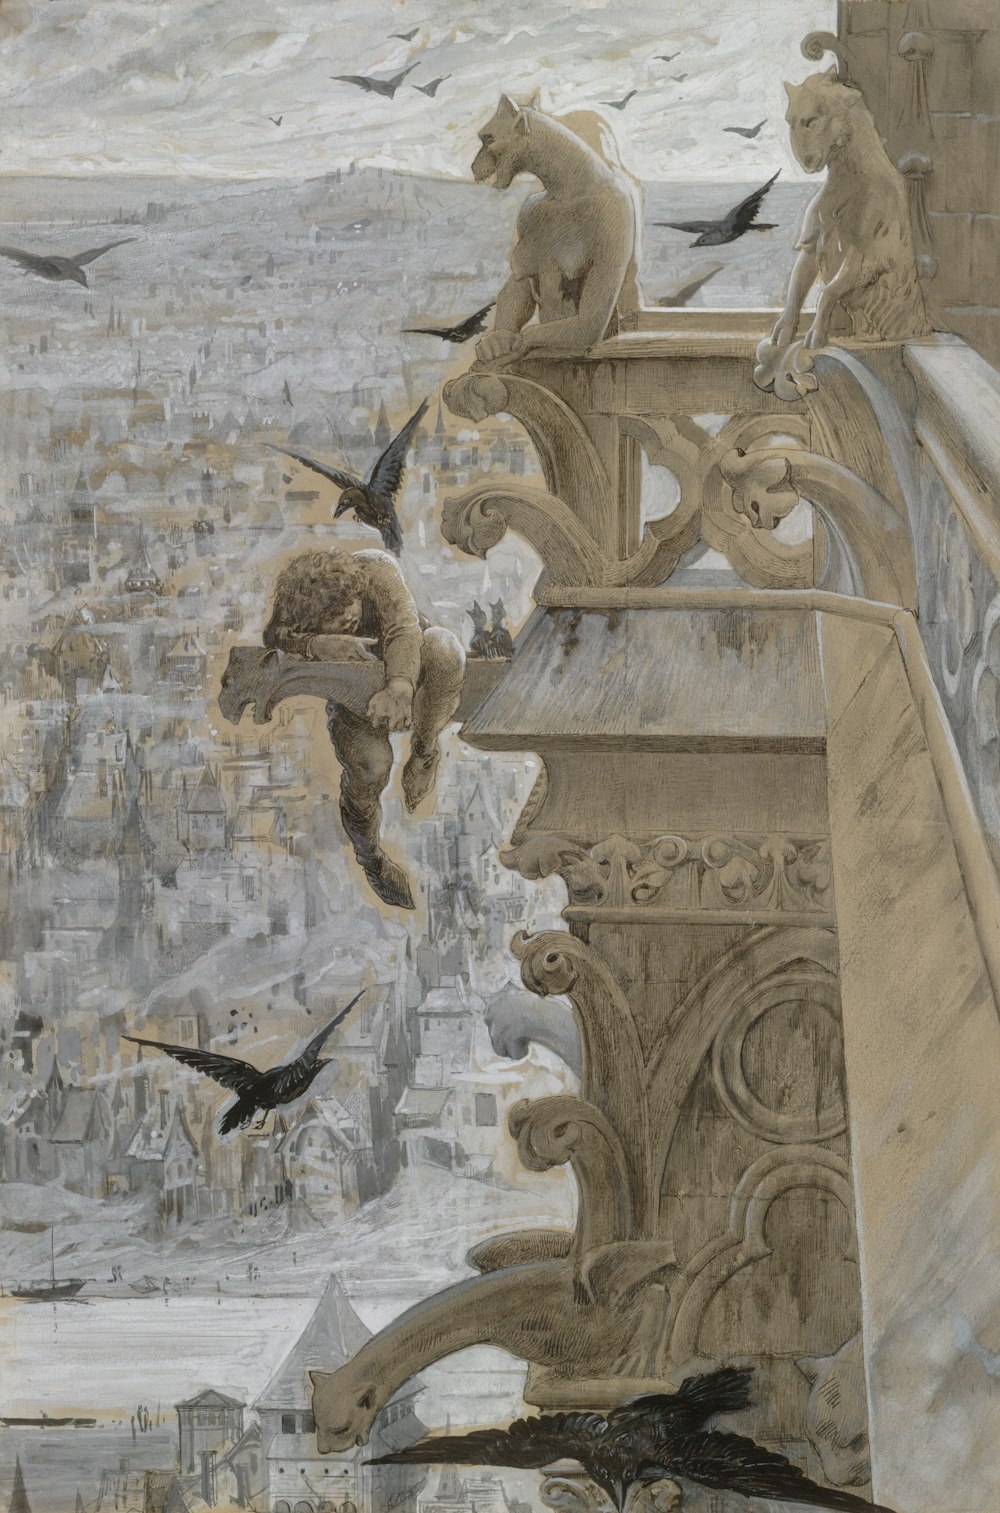 a painting of birds flying over a city